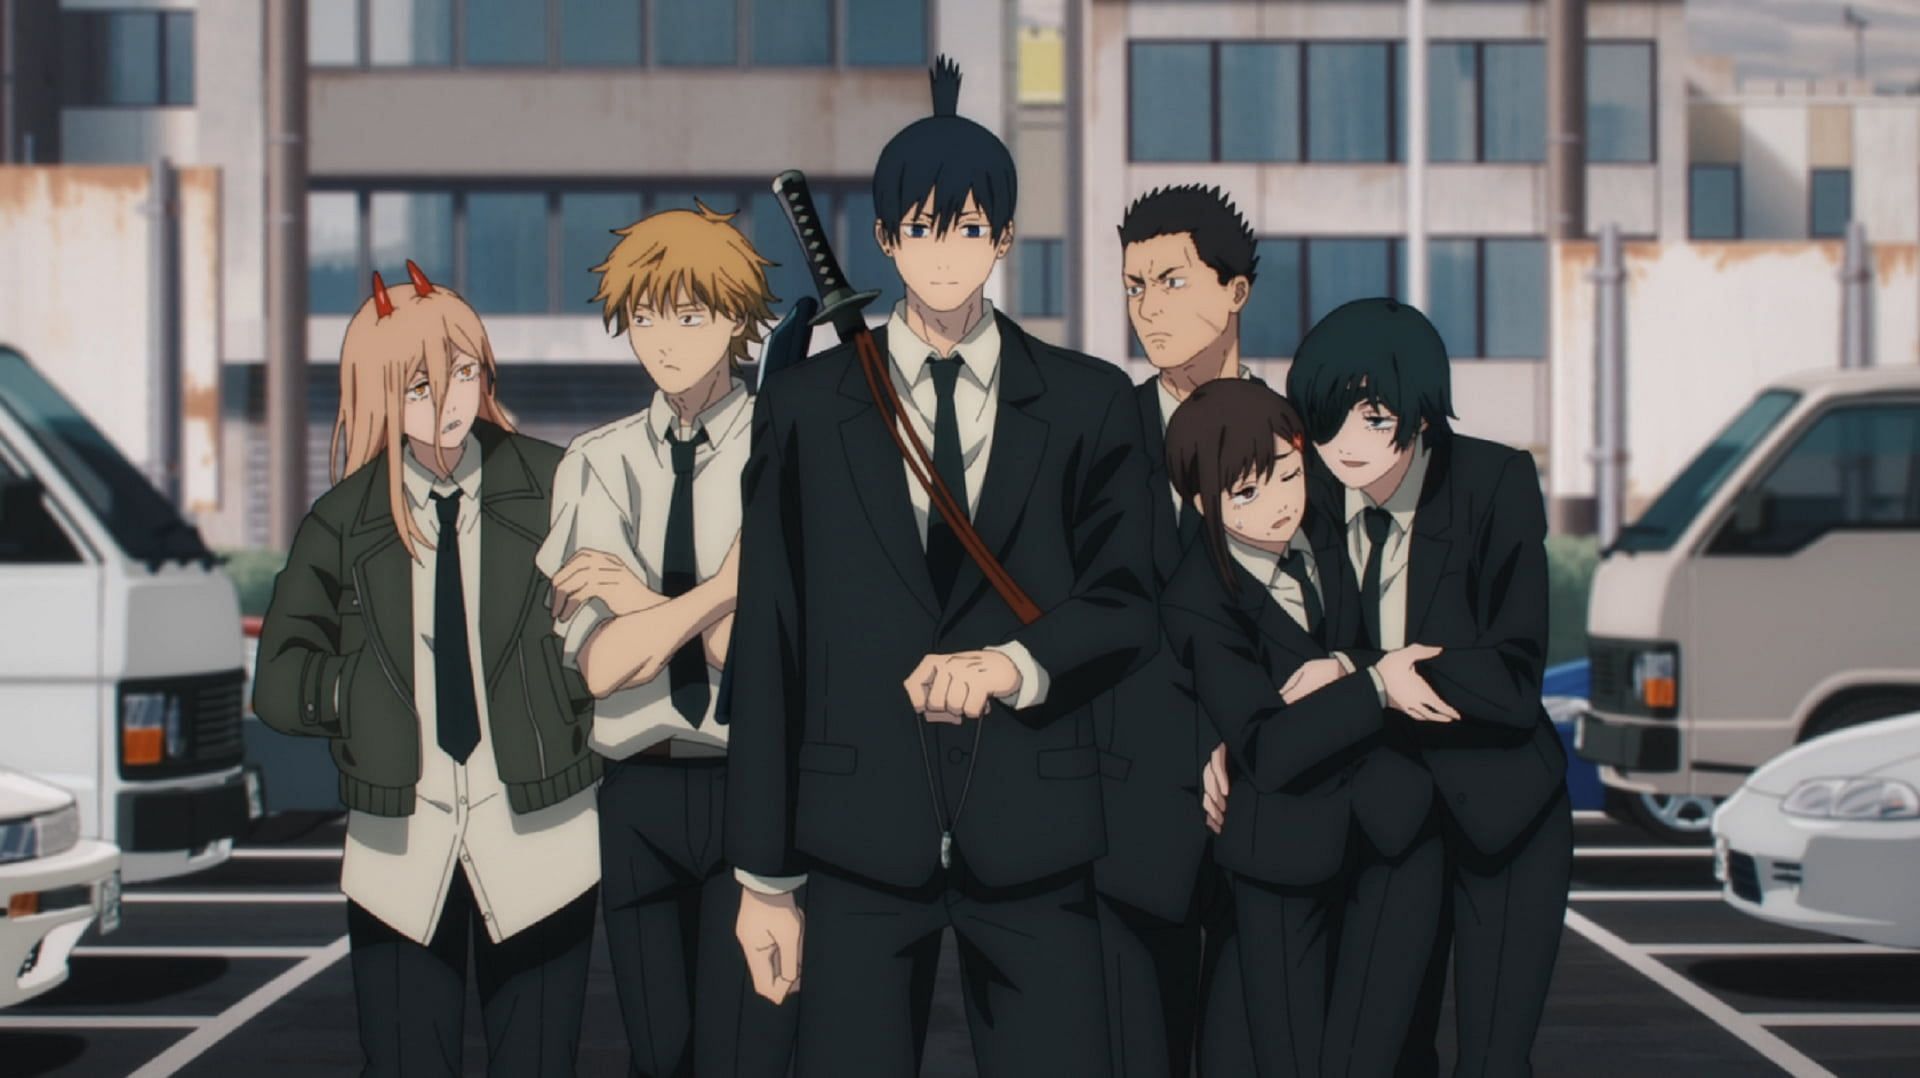 Division 4 as seen in the anime (Image via Mappa)